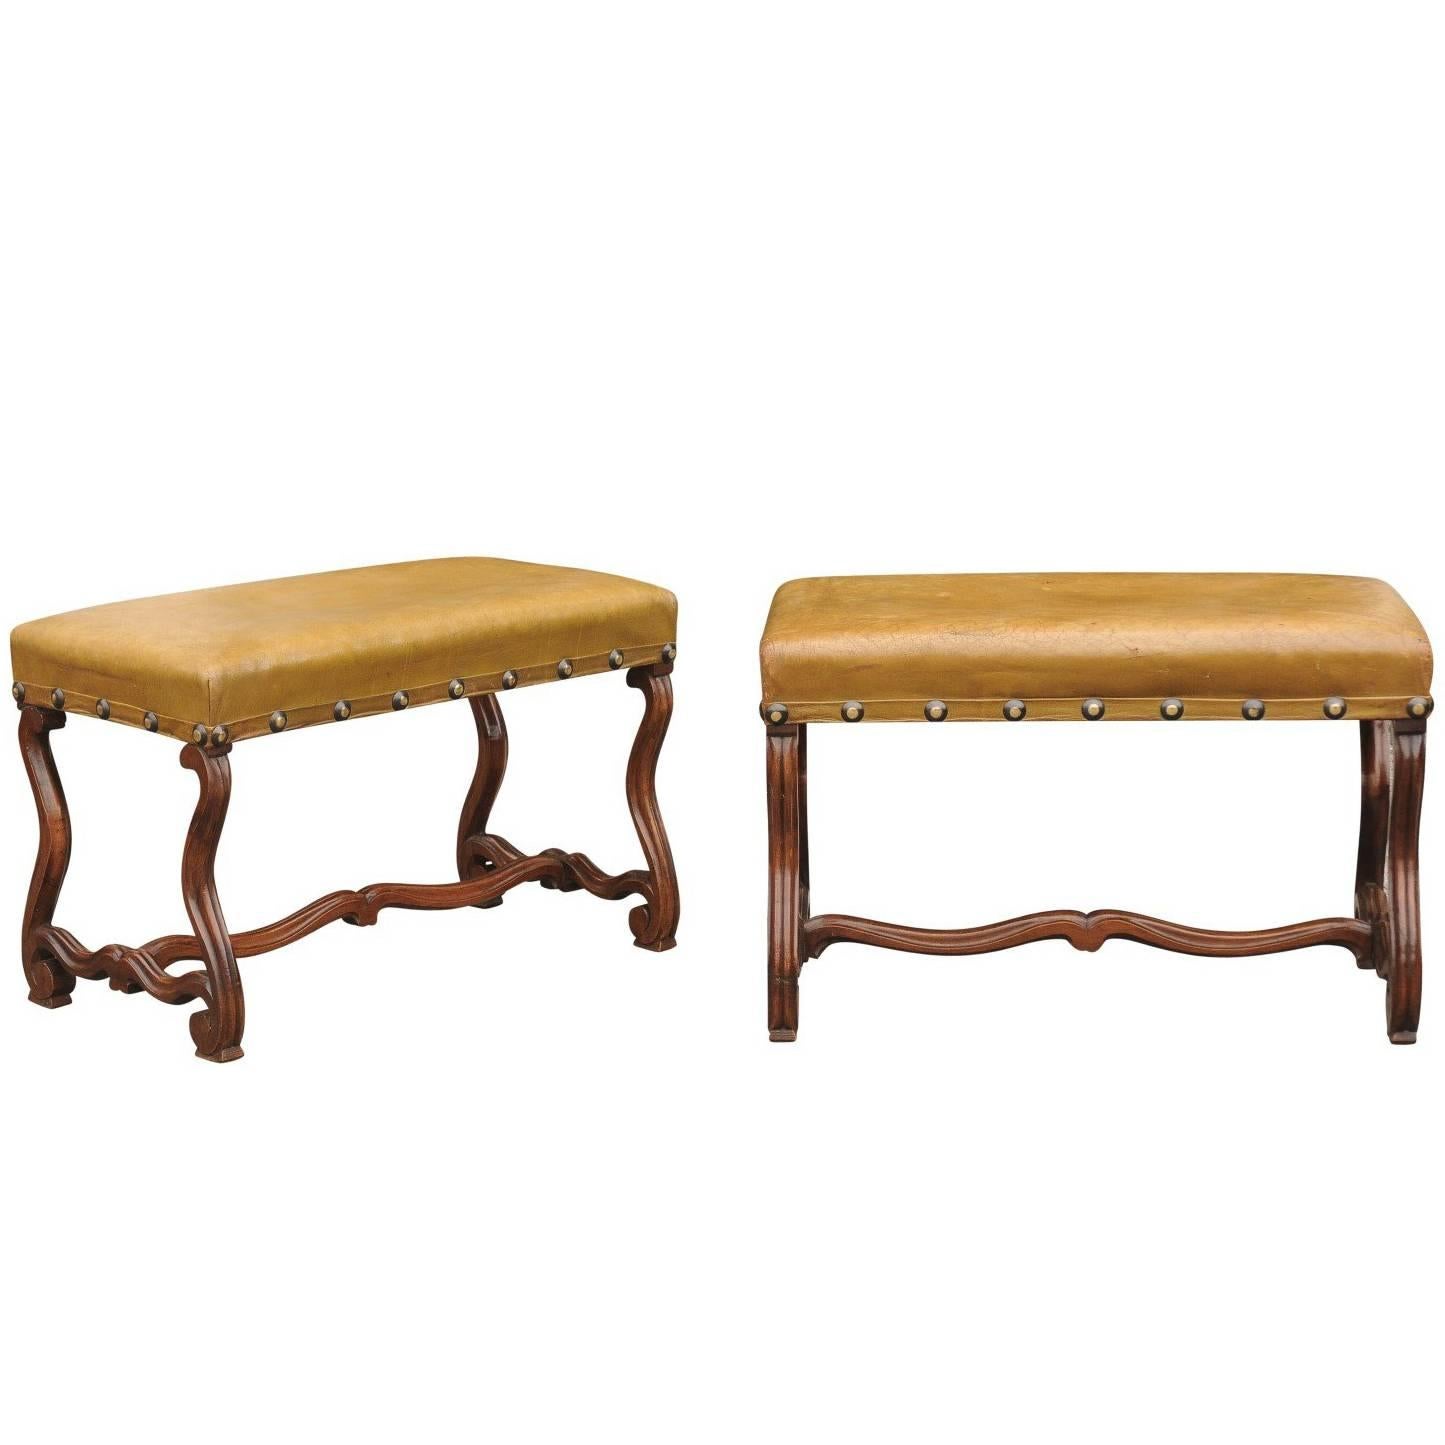 Pair of French Leather Upholstered Mutton Leg Walnut Stools / Benches, Late 19th